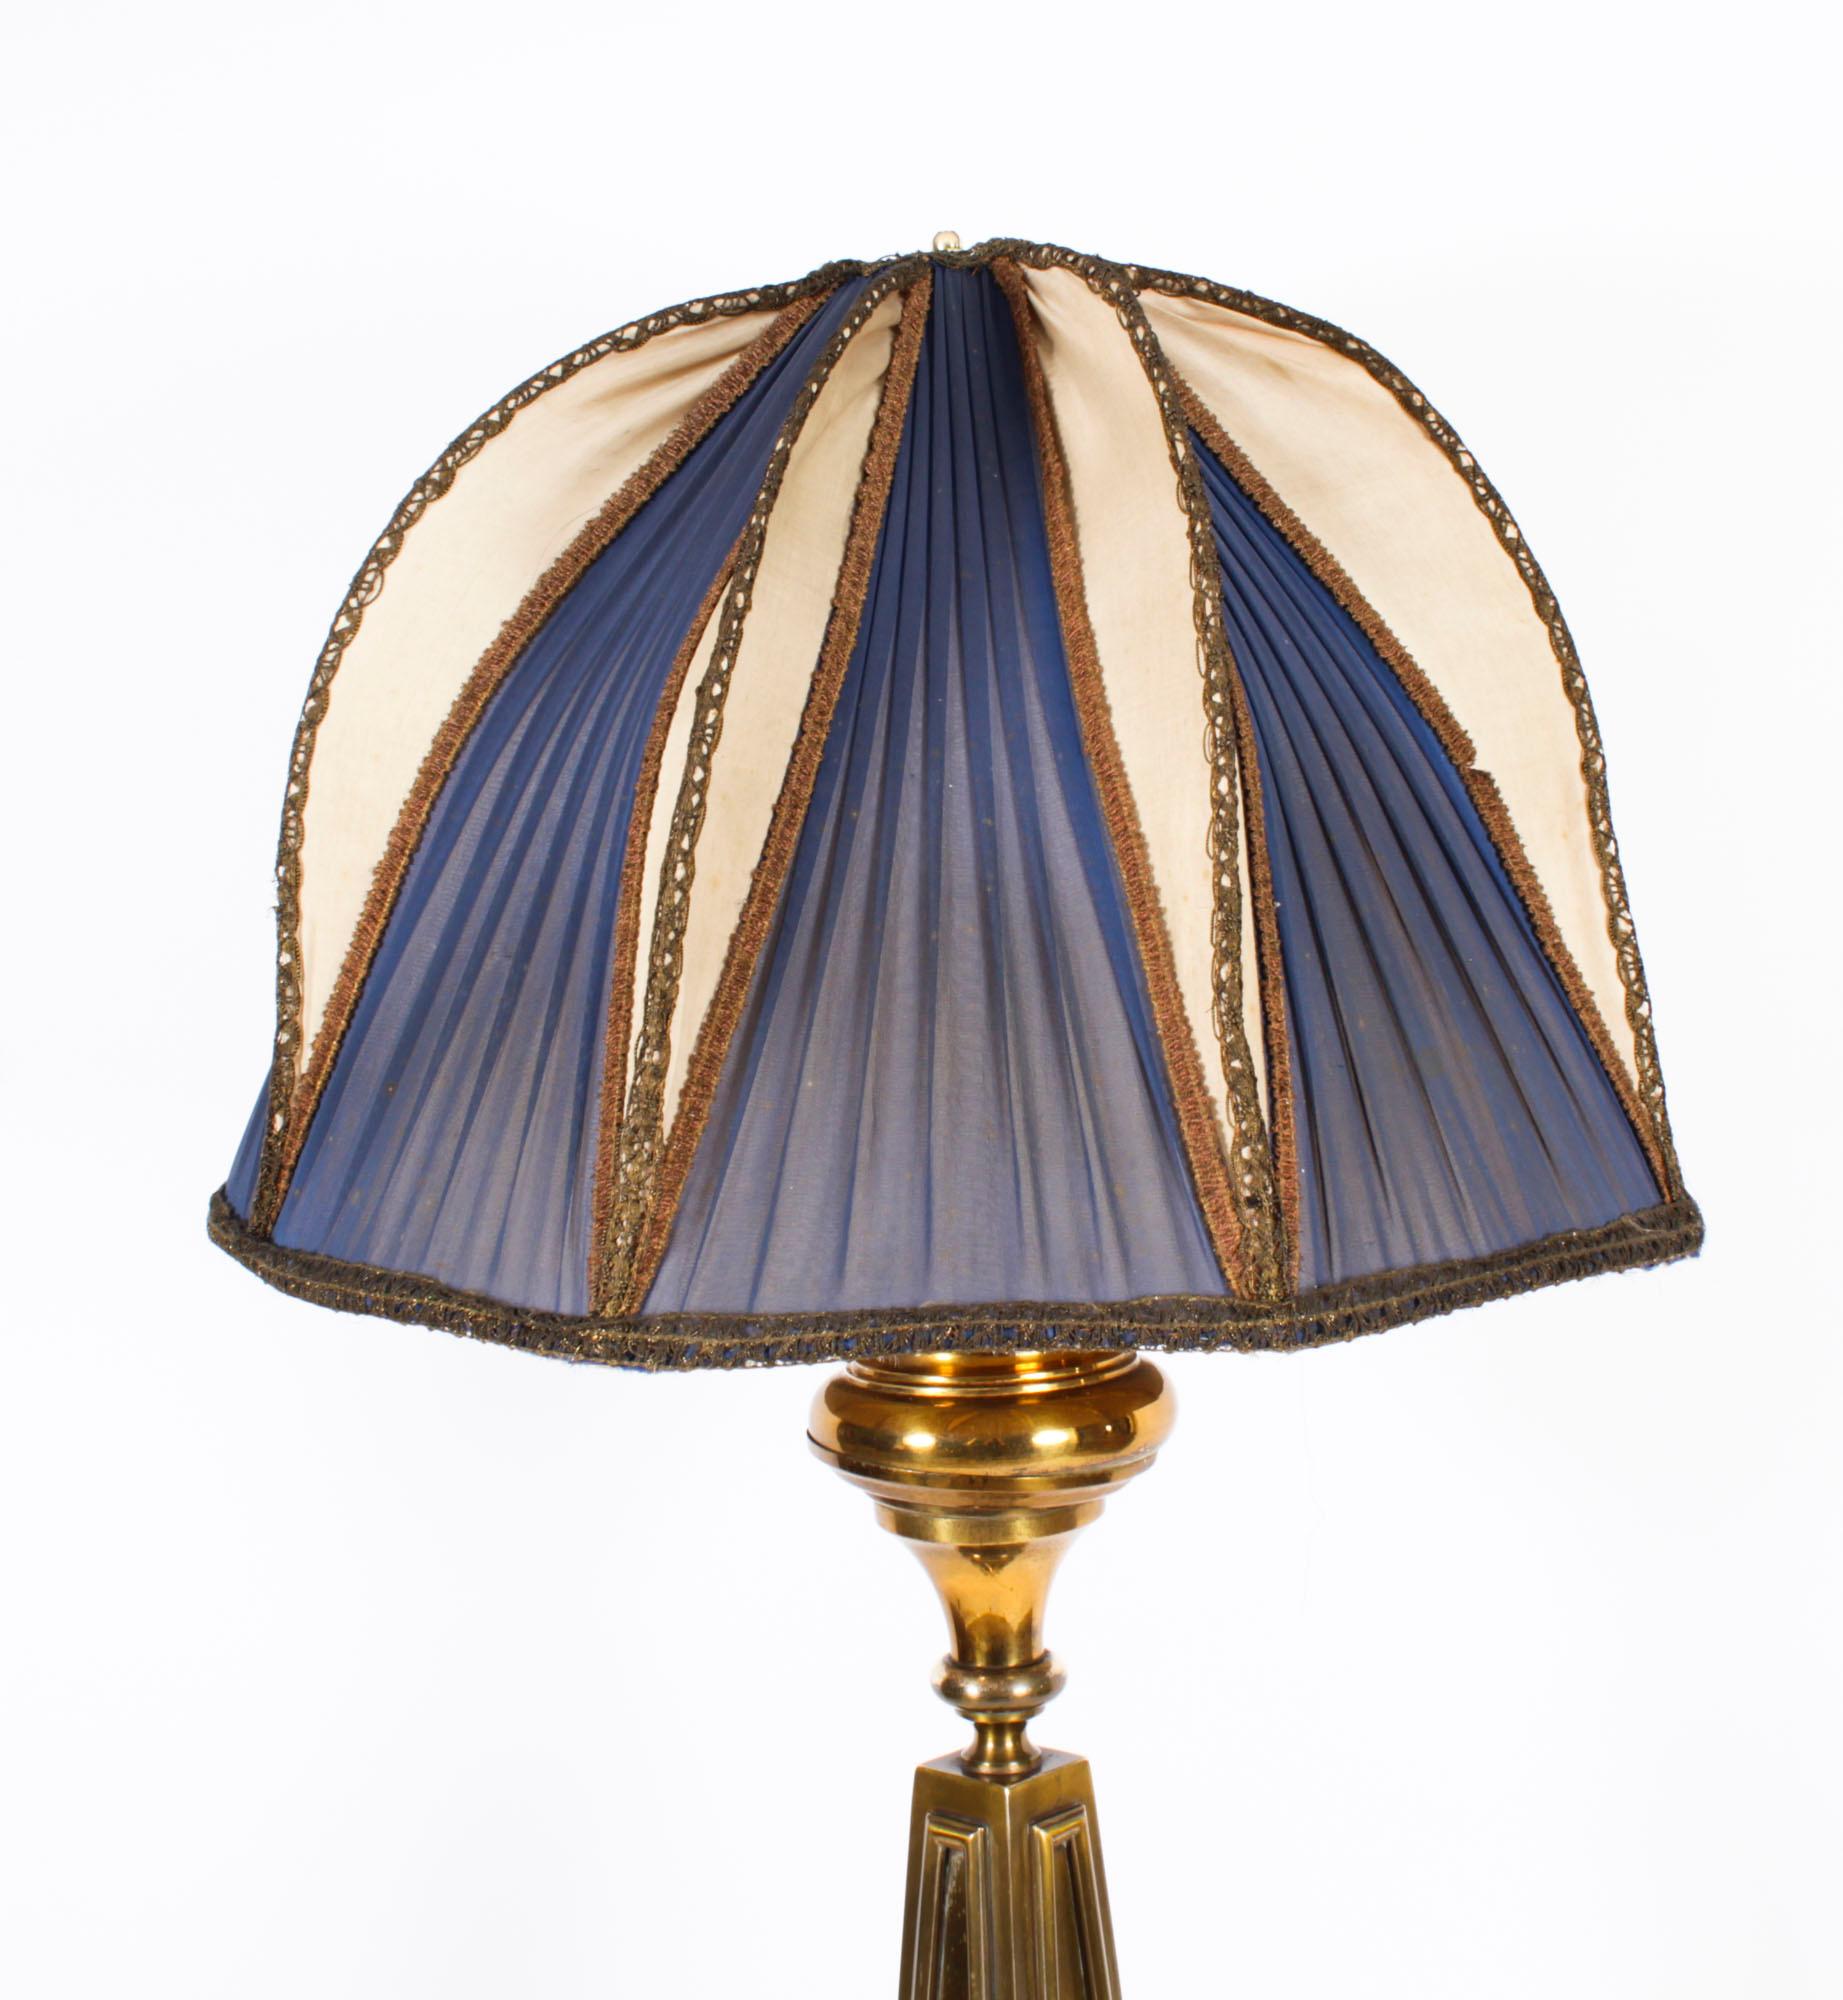 Early 20th Century Antique French Art Deco Standard Lamp with Shade Circa 1920 For Sale